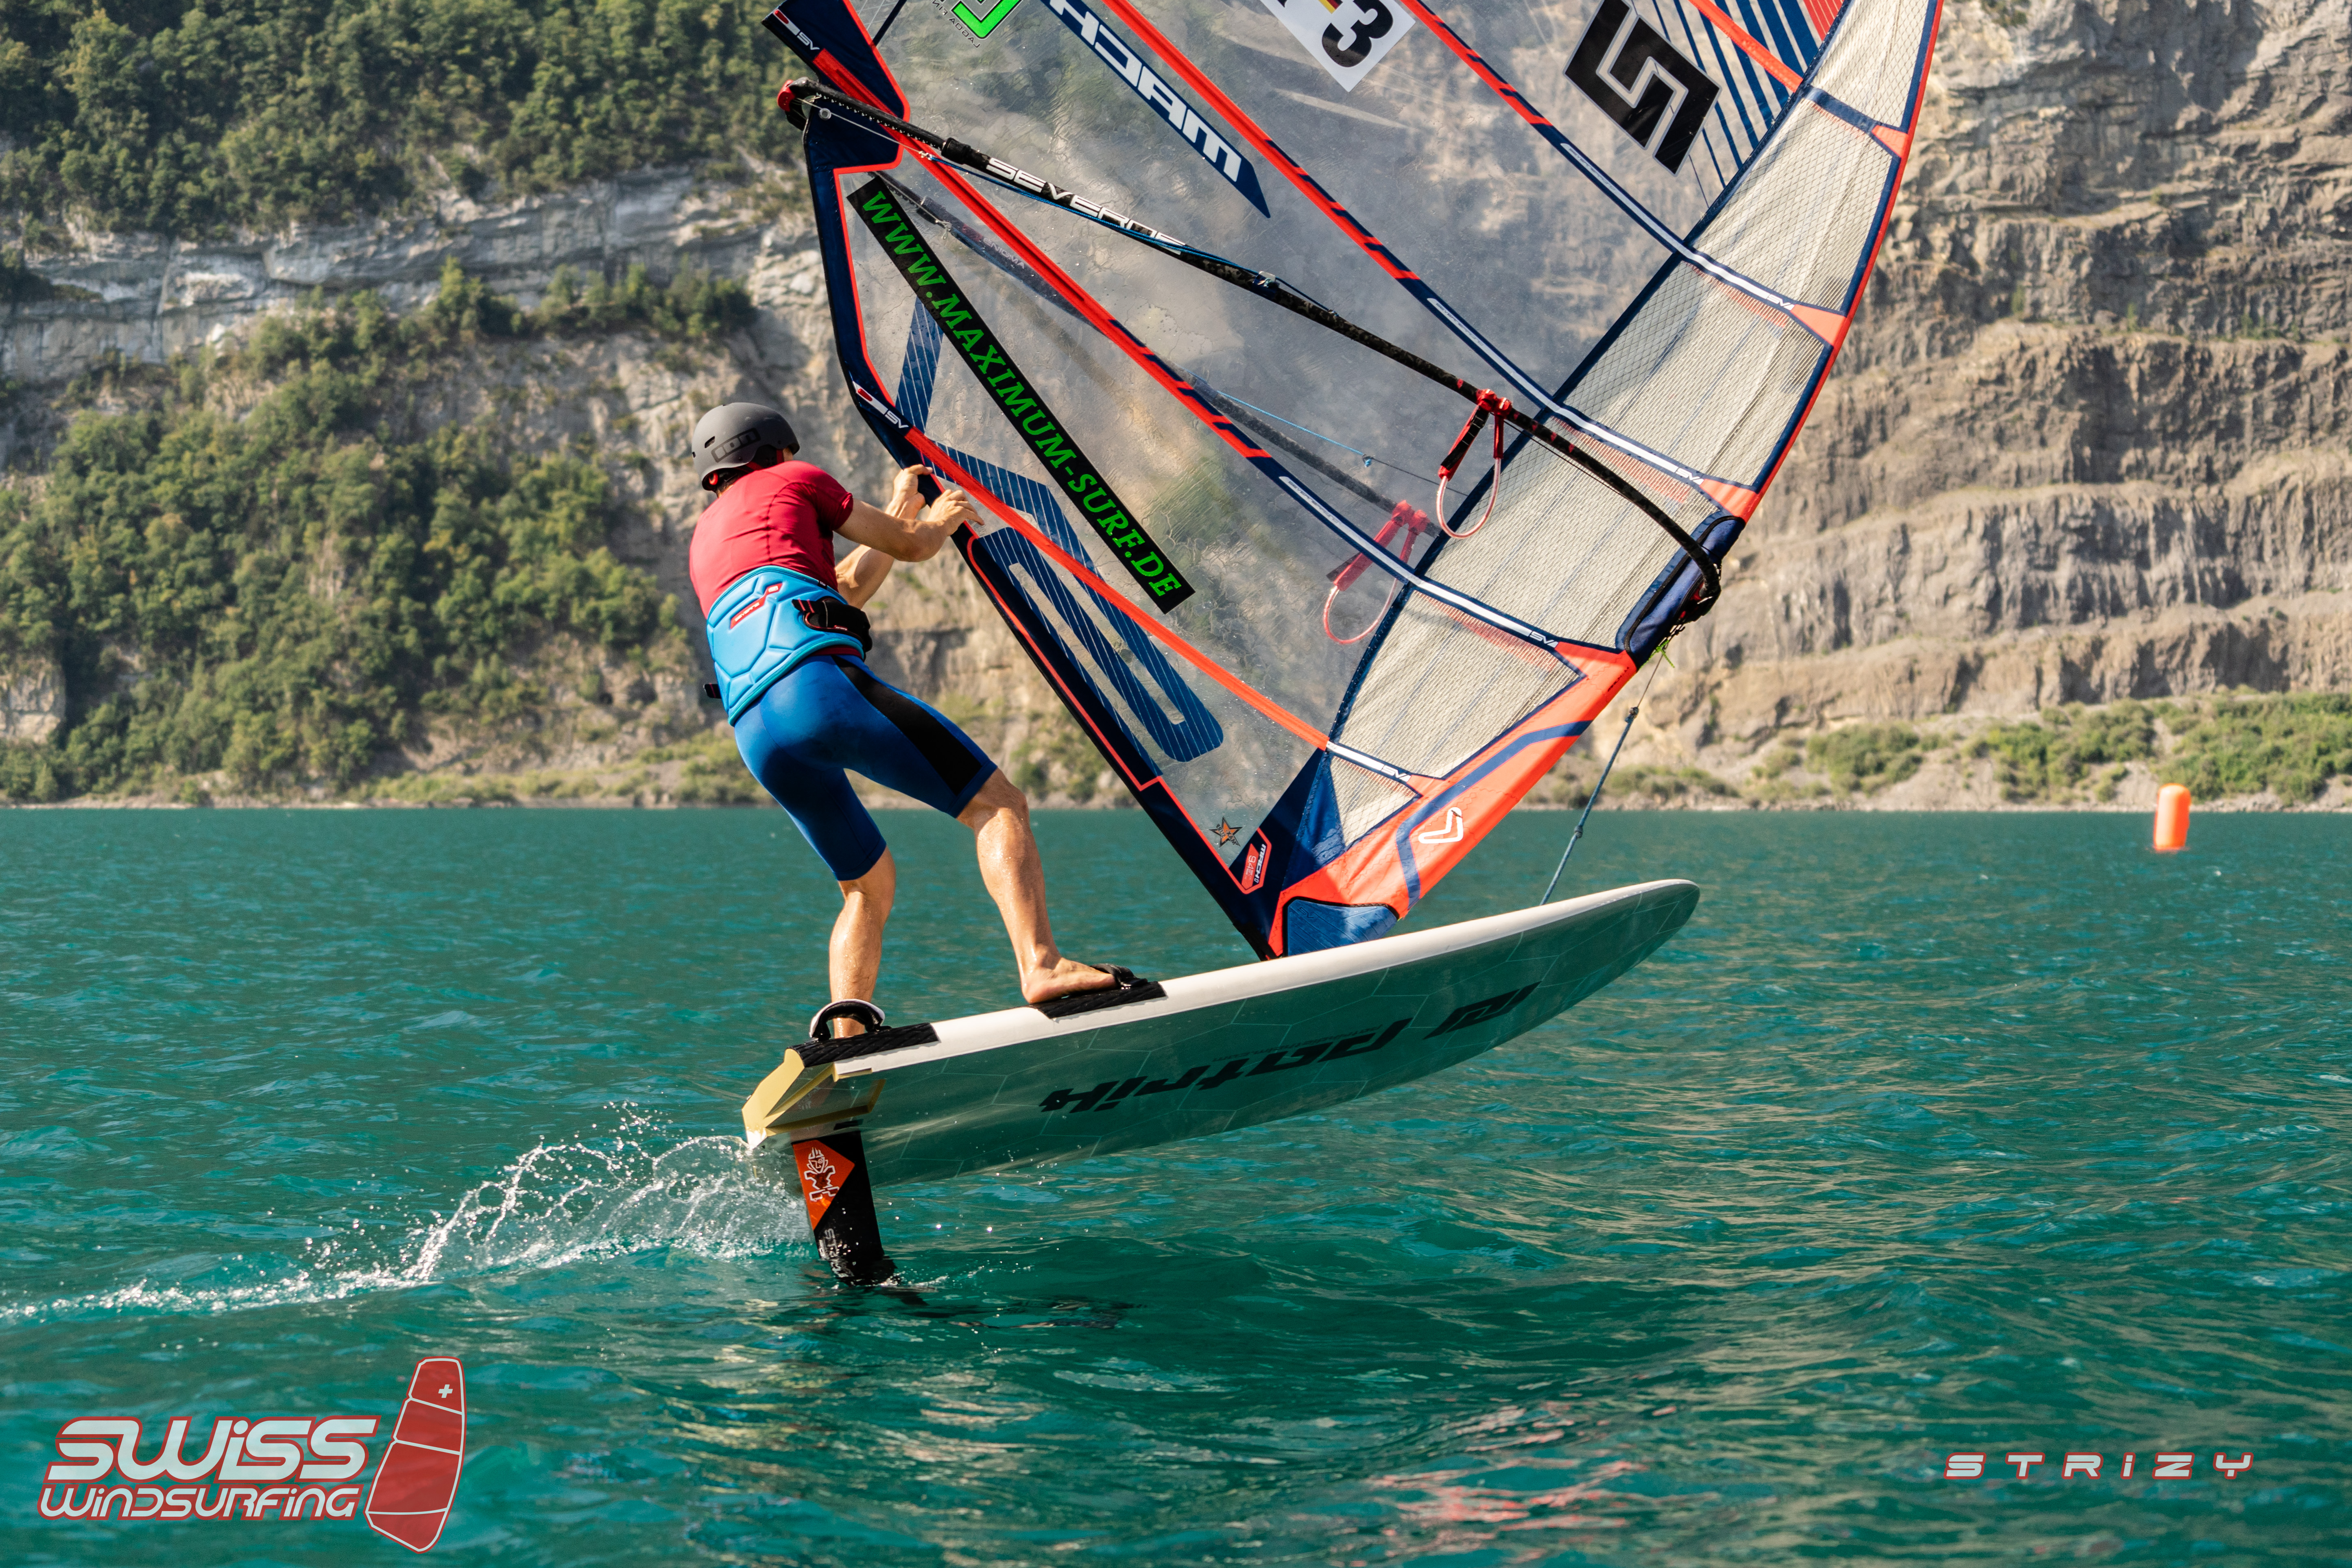  Windsurfing  Walensee  Final results